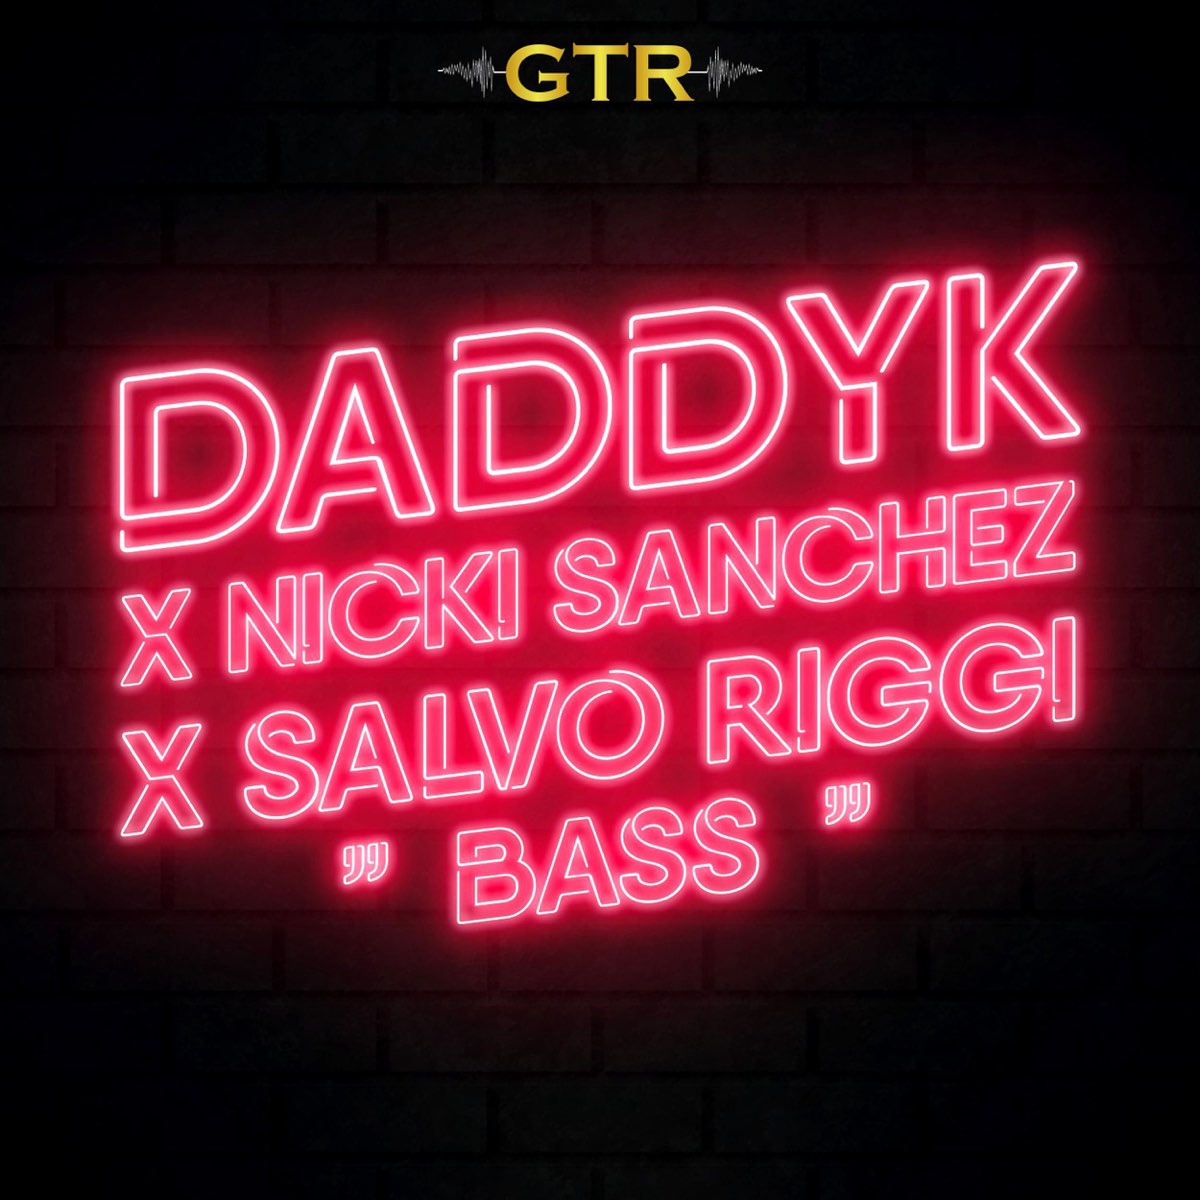 Daddy k. Bass extended mix